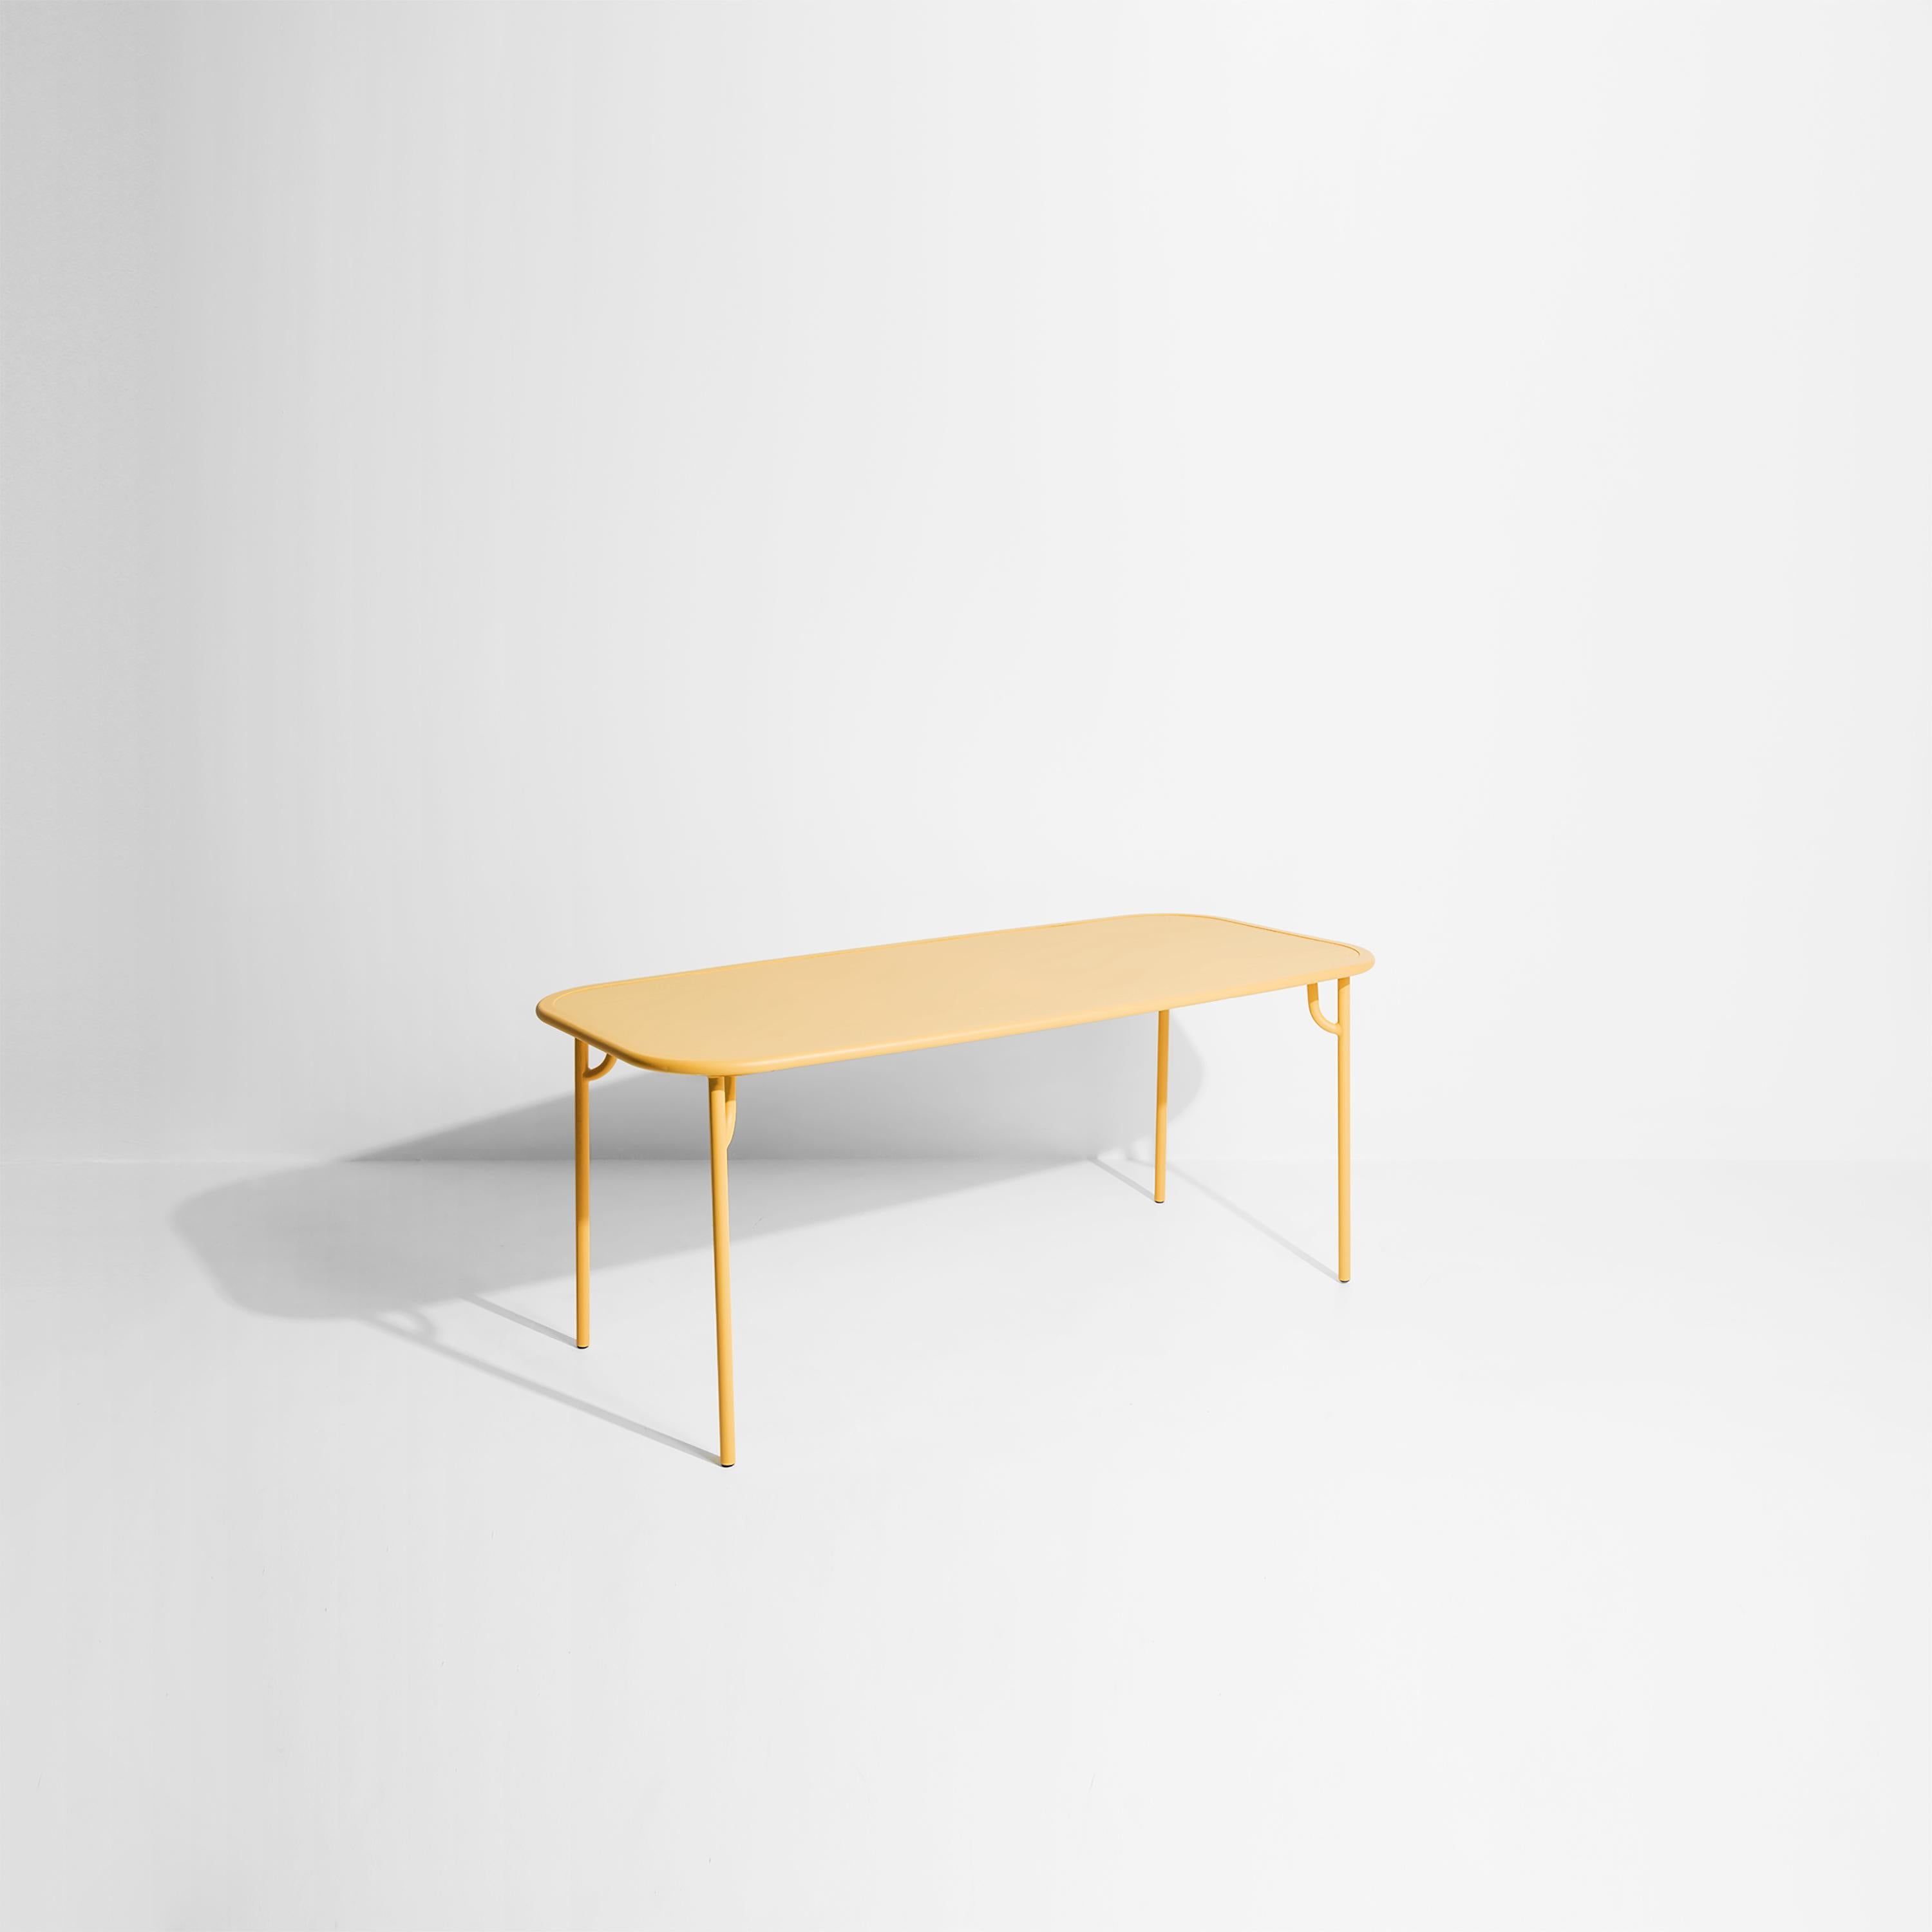 Petite Friture Week-End Medium Plain Rectangular Dining Table in Saffron Aluminium by Studio BrichetZiegler, 2017

The week-end collection is a full range of outdoor furniture, in aluminium grained epoxy paint, matt finish, that includes 18